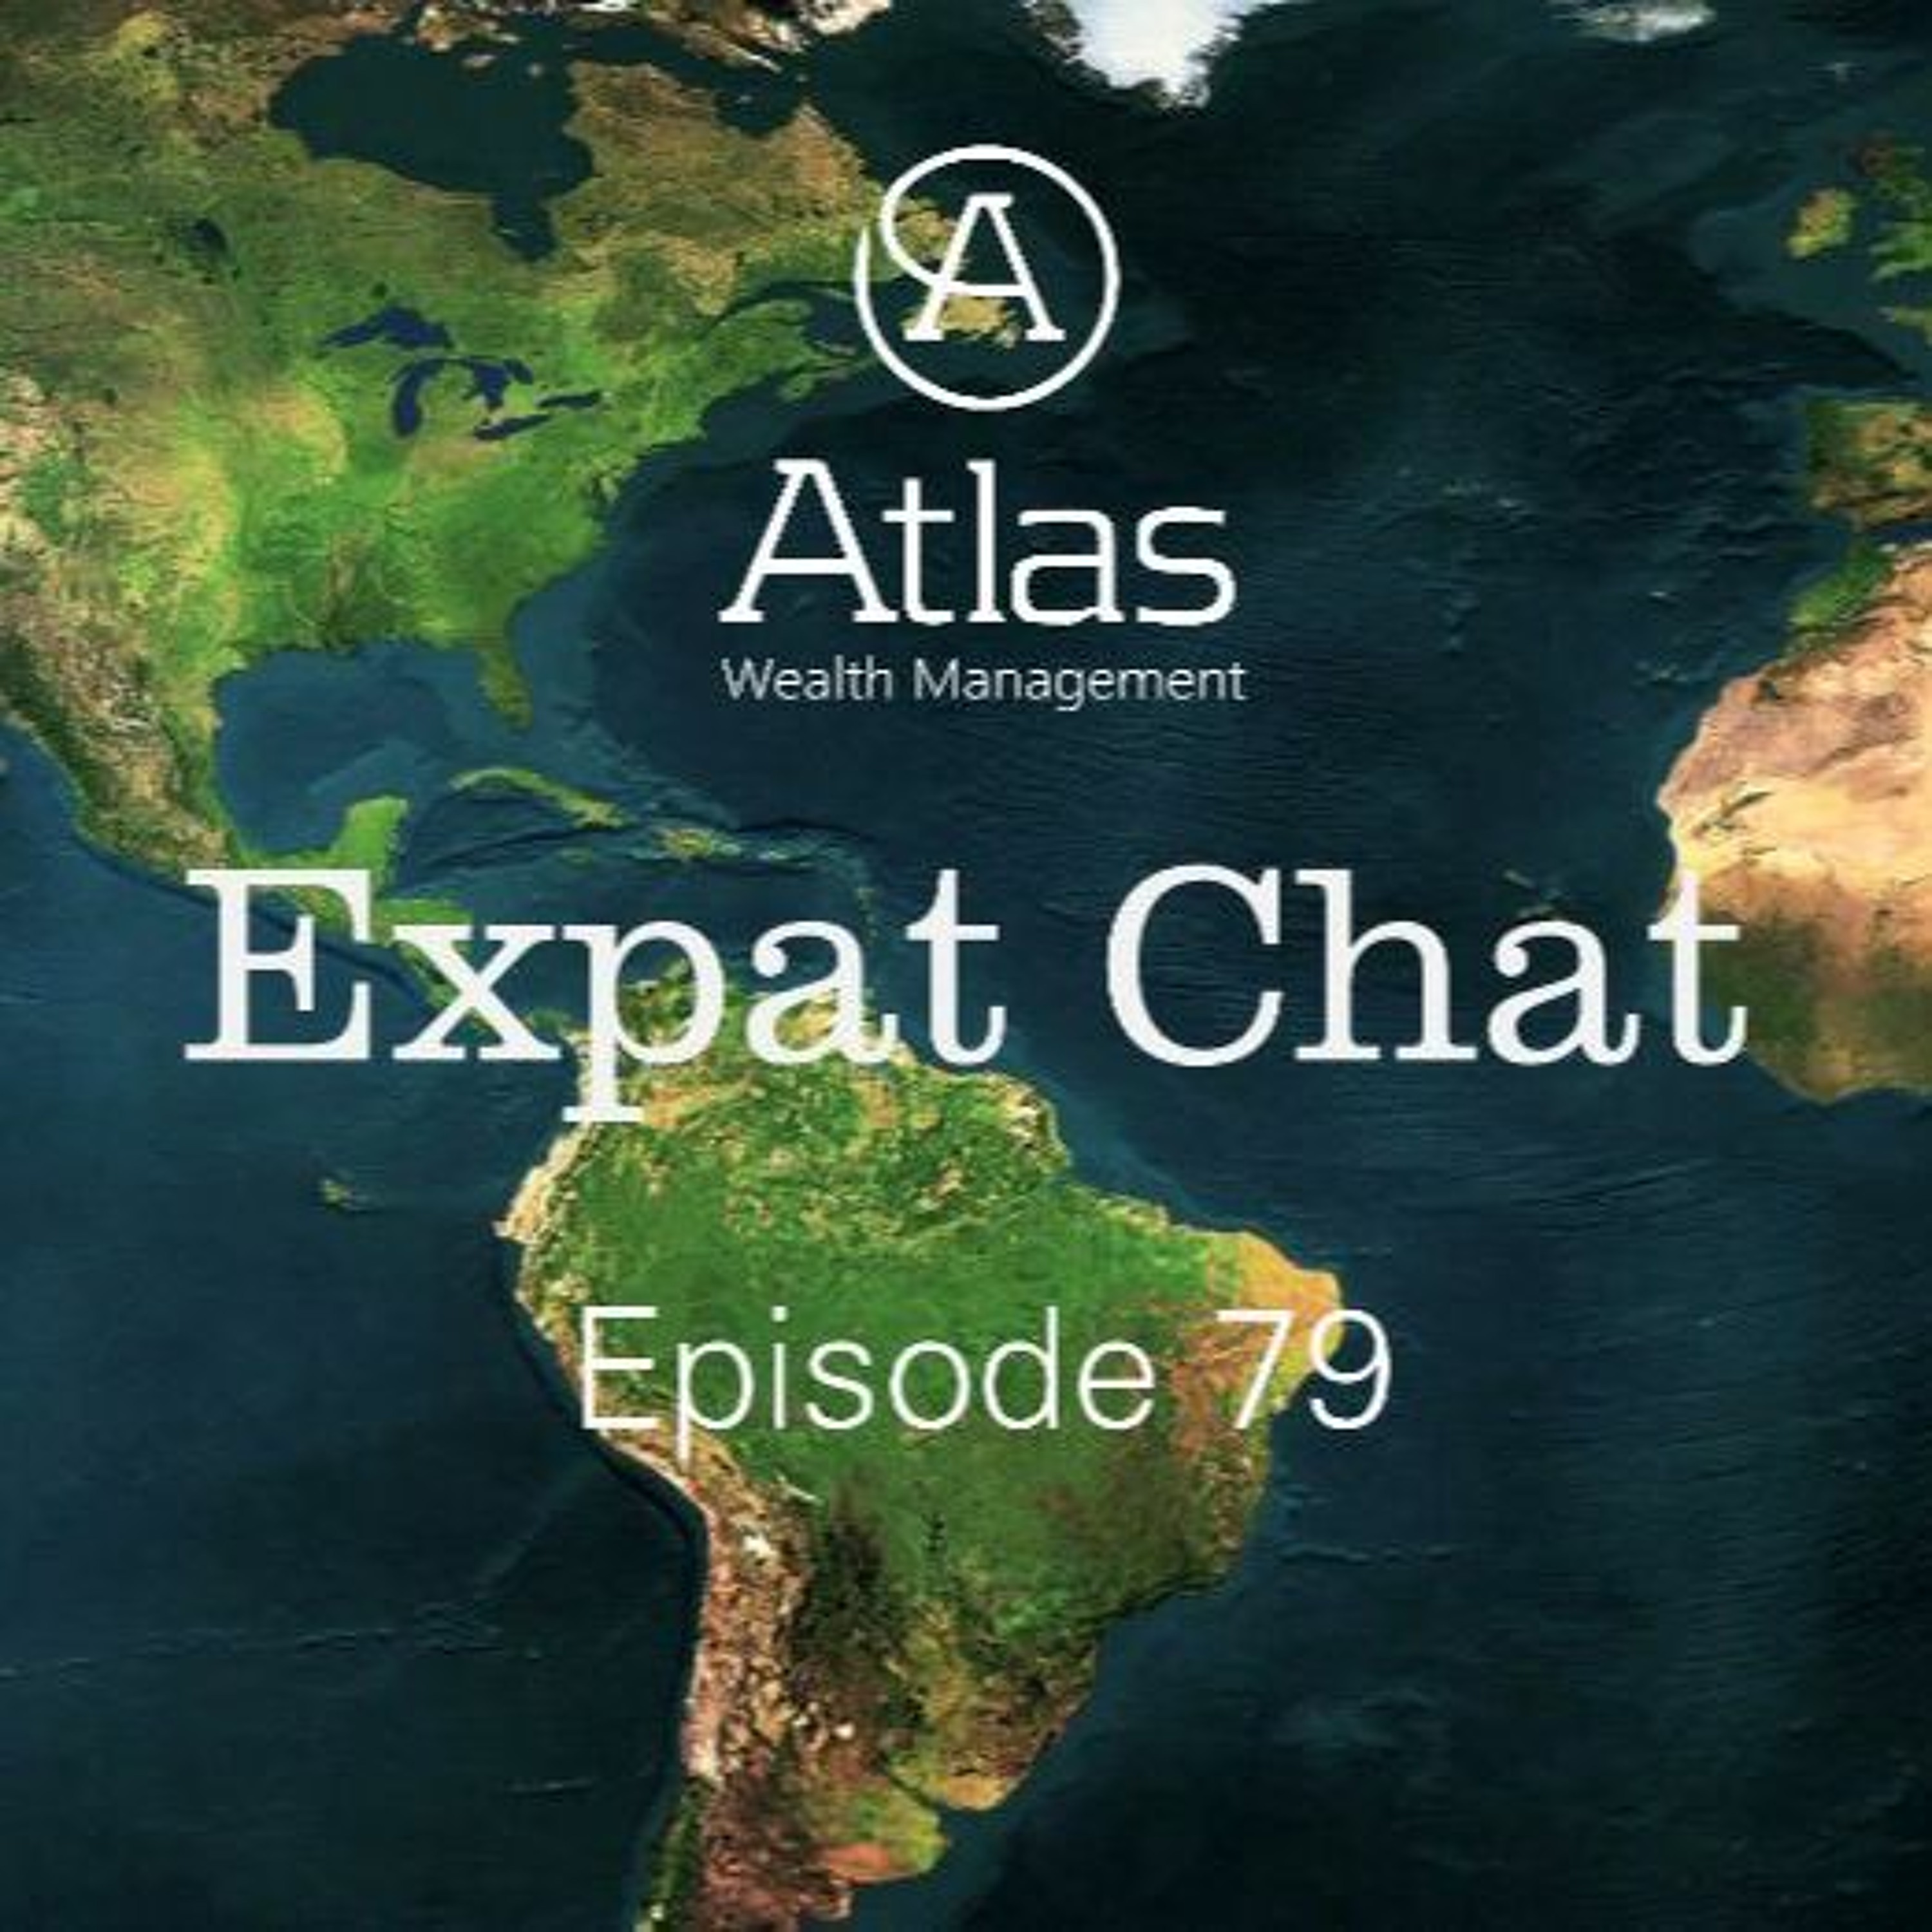 Expat Chat Episode 79 - Is Now The Time To Buy Australian Property?